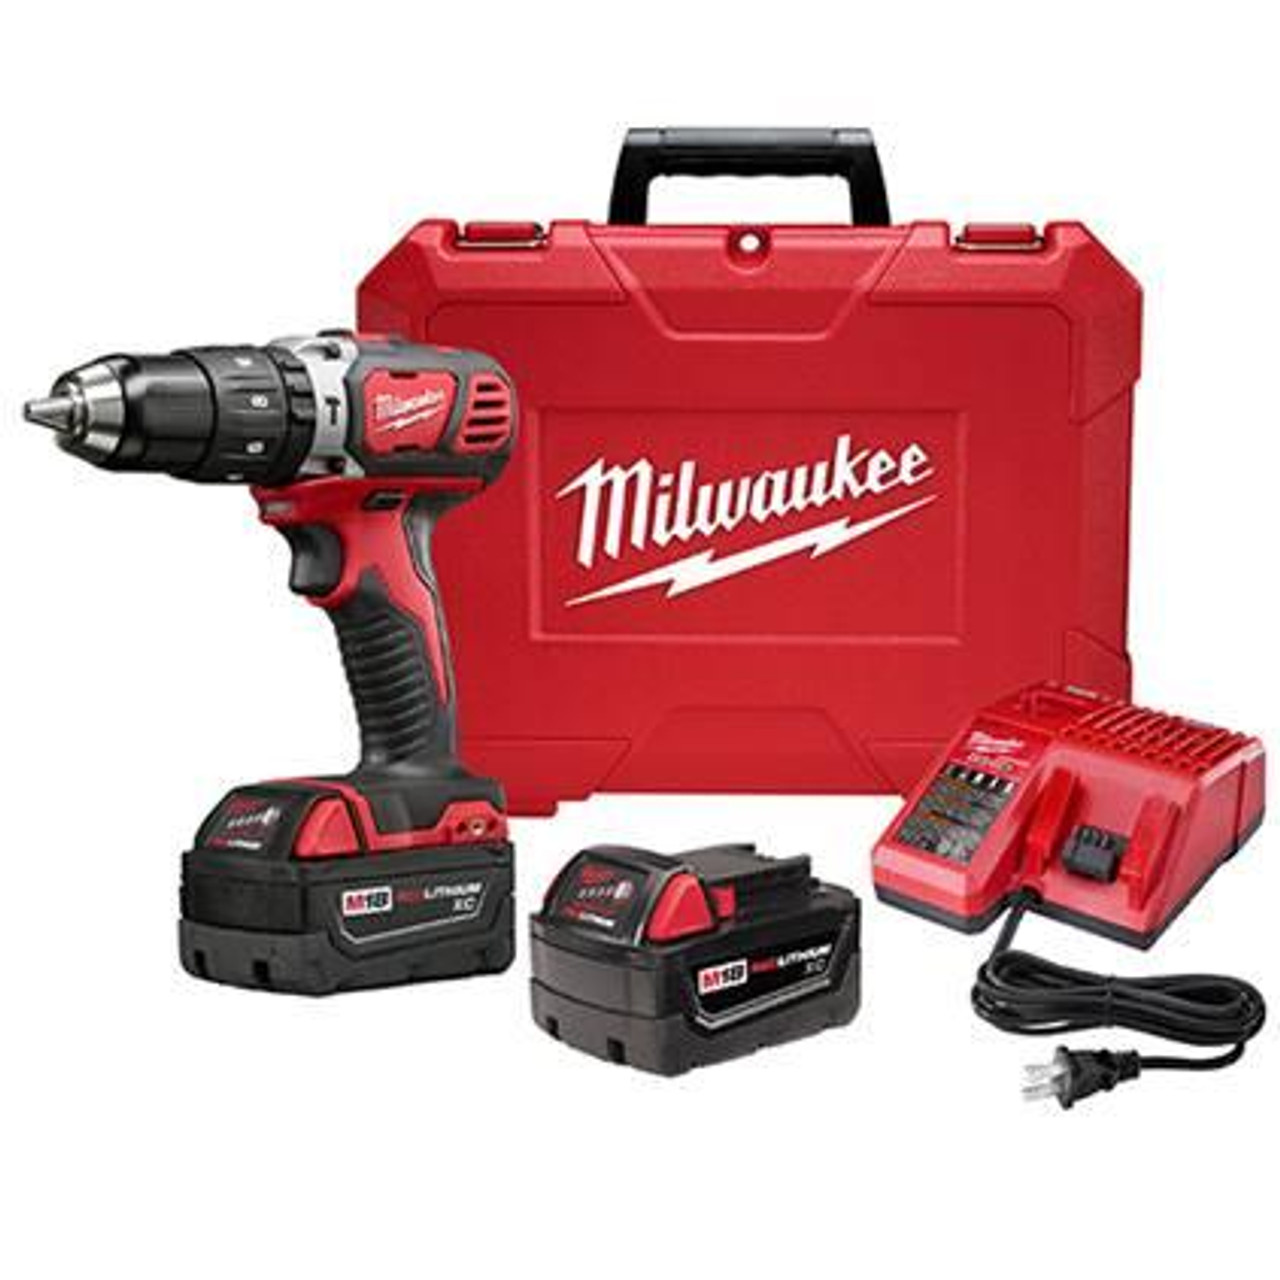 Milwaukee 2607-22 M18 1/2" Compact Hammer Drill/Driver Kit Quality  Plumbing Supply